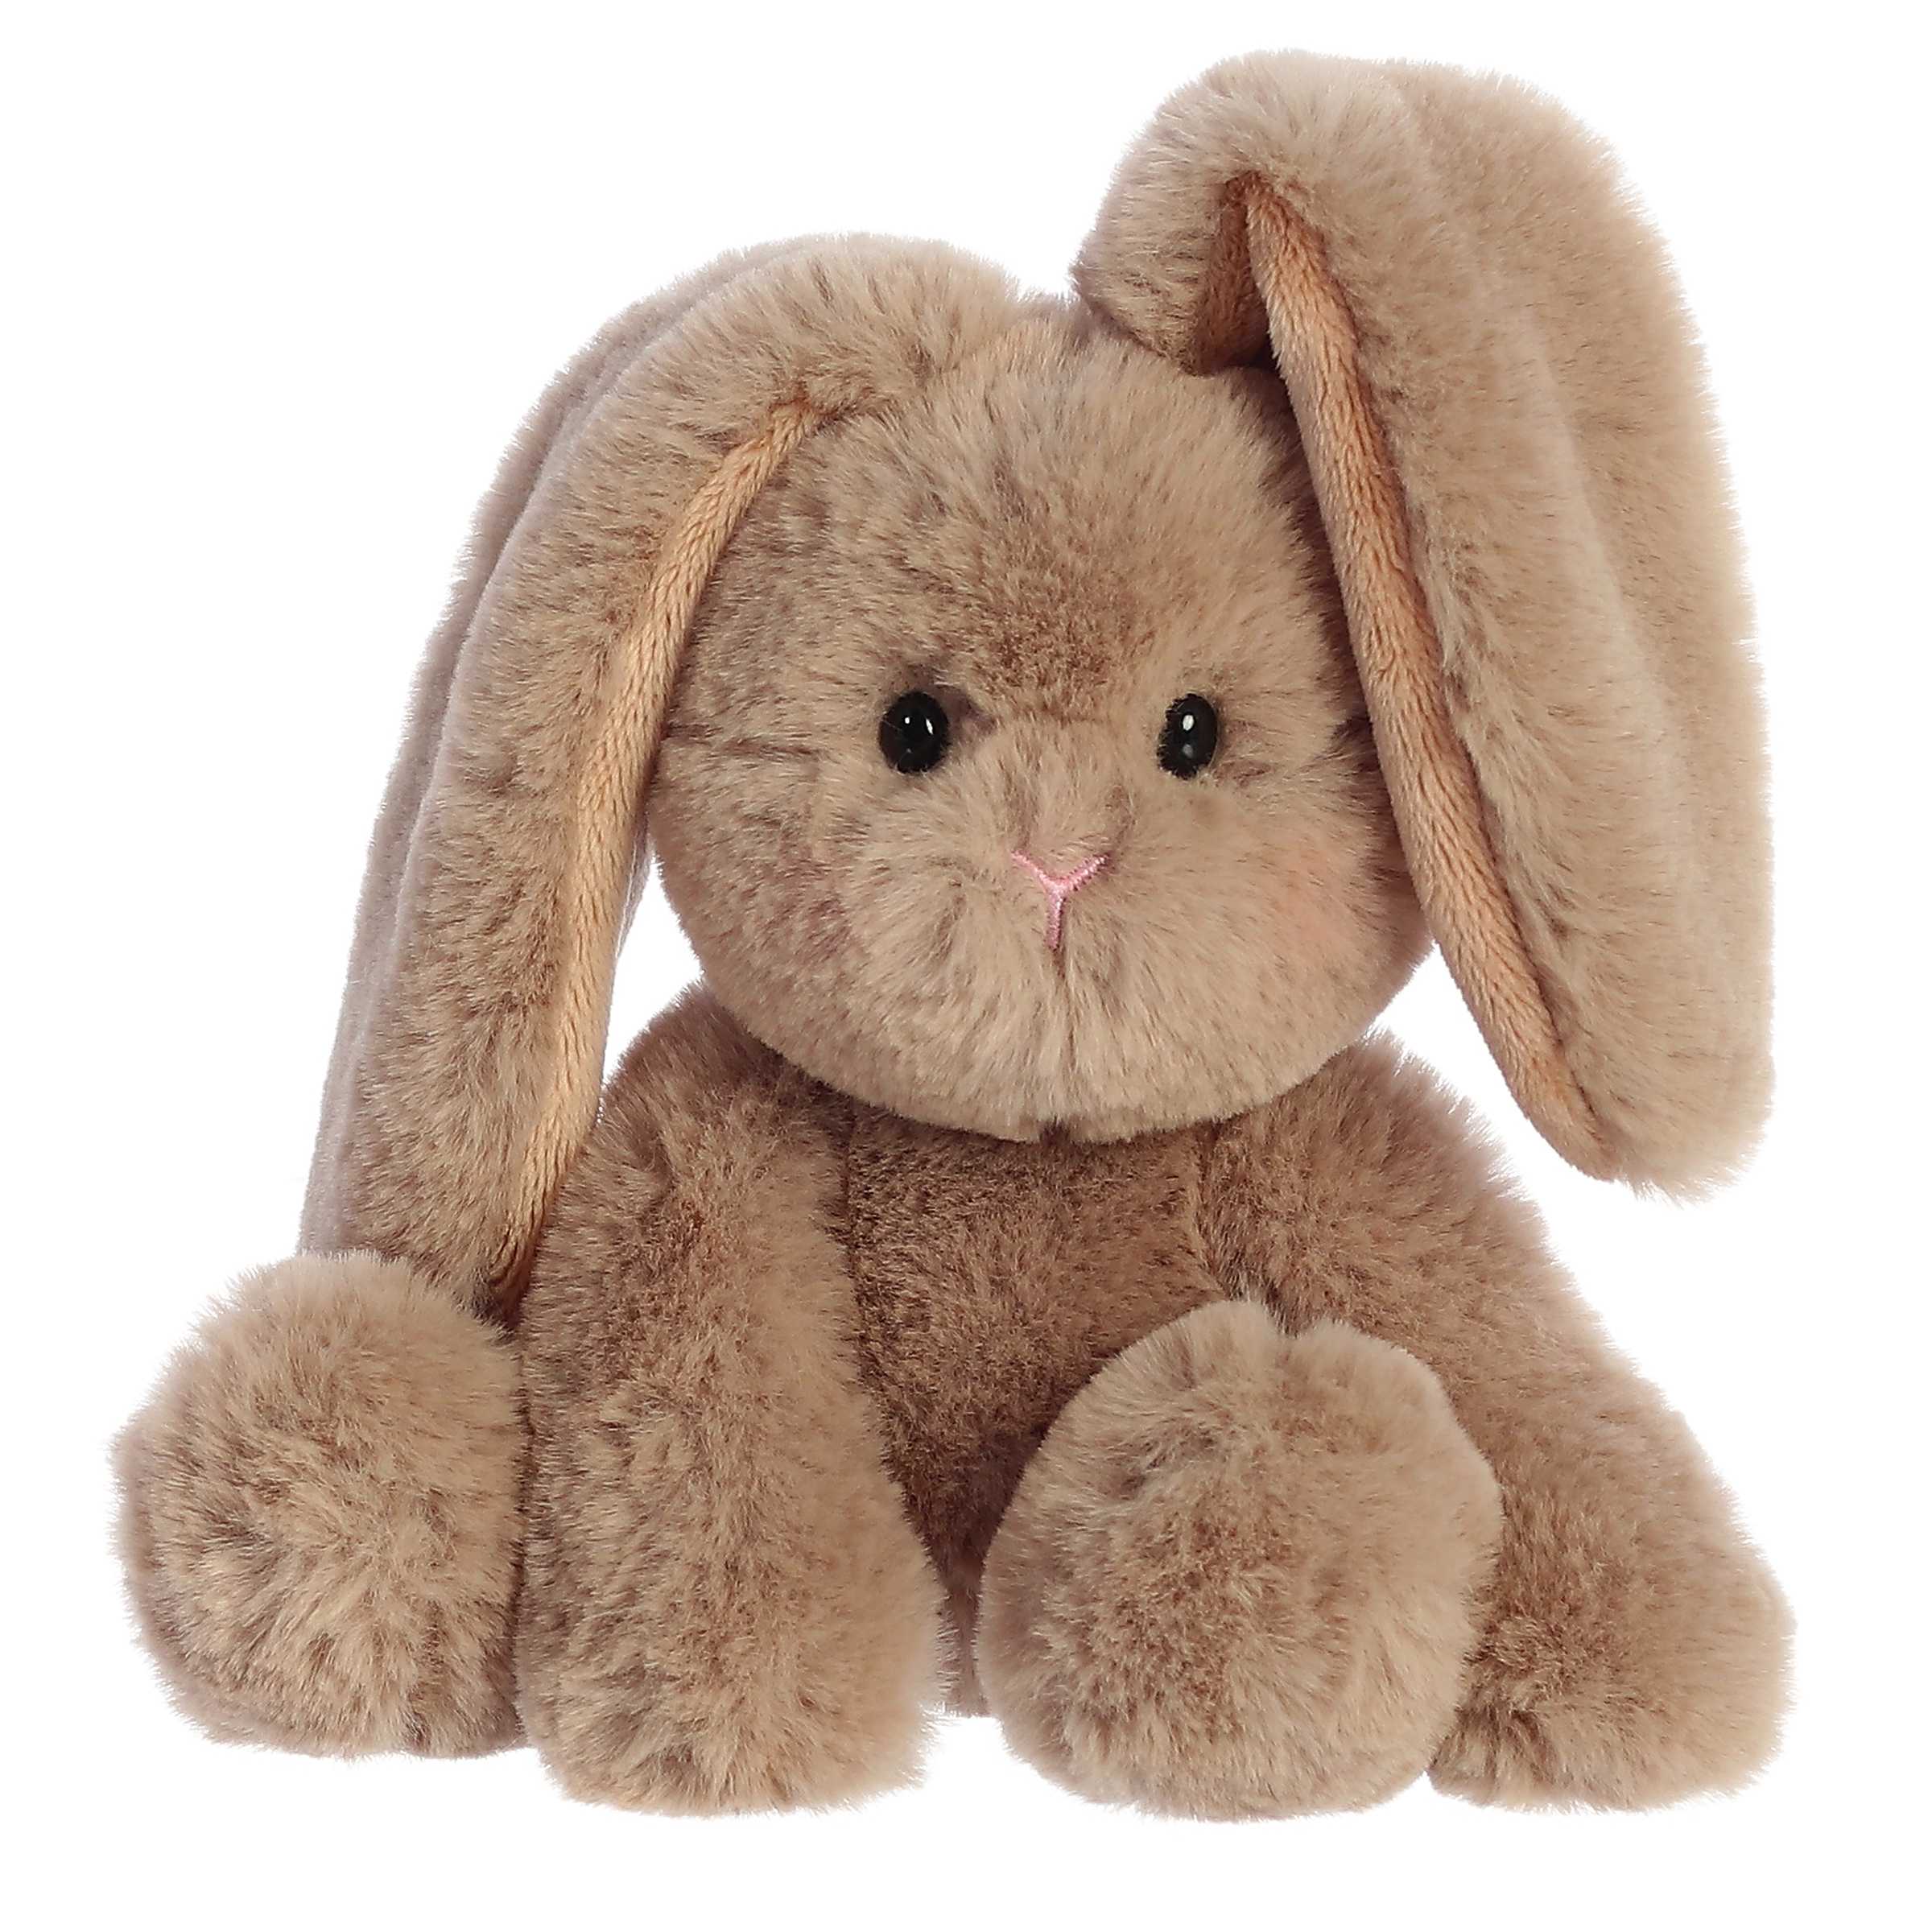 Taupe Candy Cottontail plush with a plush earth-toned coat, sparkling eyes, and soft pink nose, from the Candy Cottontails